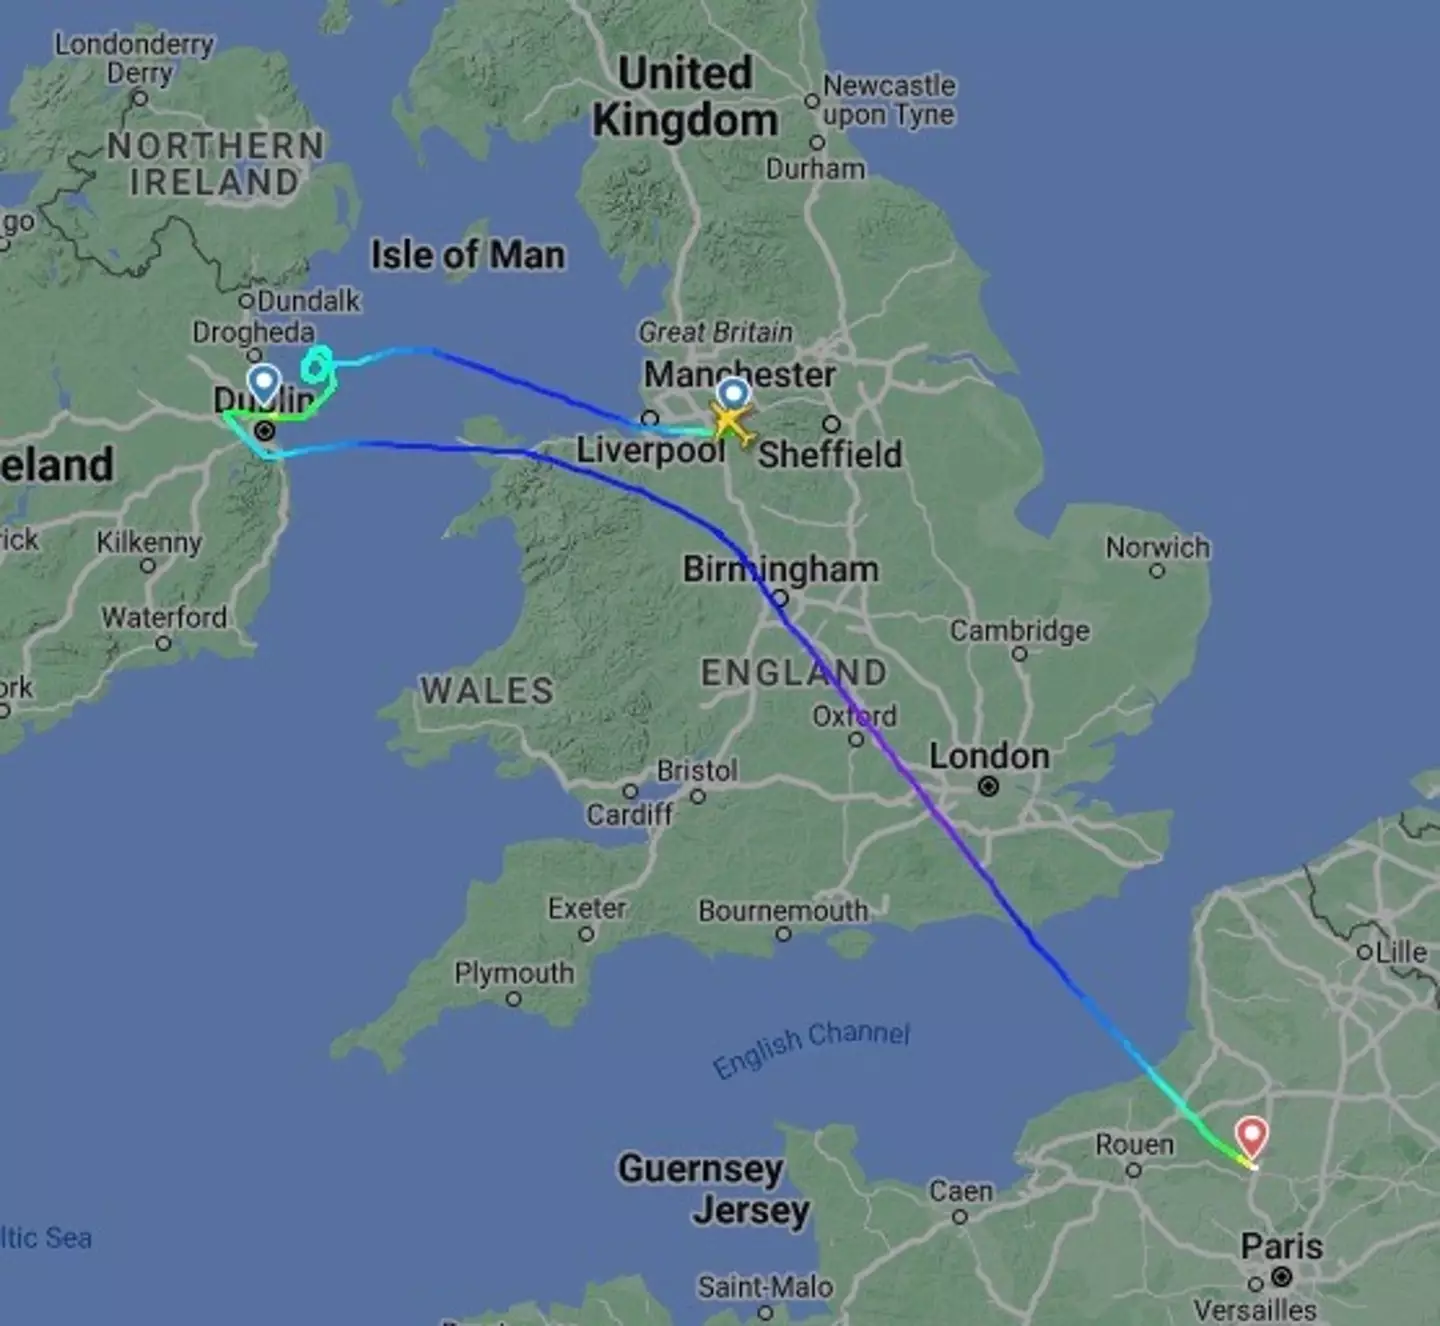 Brits online have been 'sparing a thought' to the flyers diverted to the city of love as flight FR555 was seen on FlightRadar circling the Irish Sea as it attempted to land at Dublin Airport.